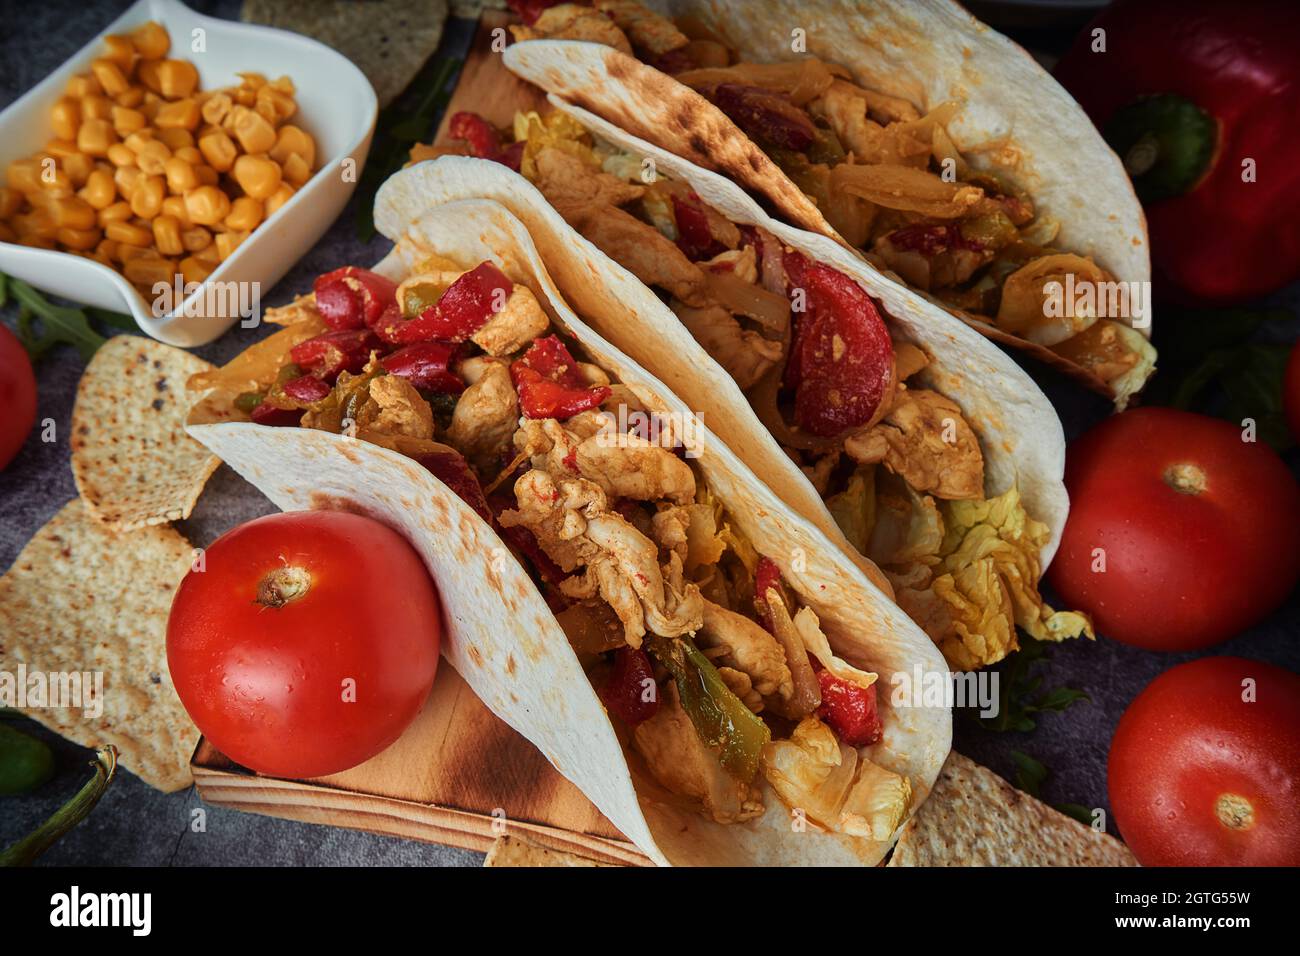 Still Life Of Three Fajitas Or Mexican Tacos With Meat, Pepper, Tomato, Spicy Pepper And Nachos Stock Photo